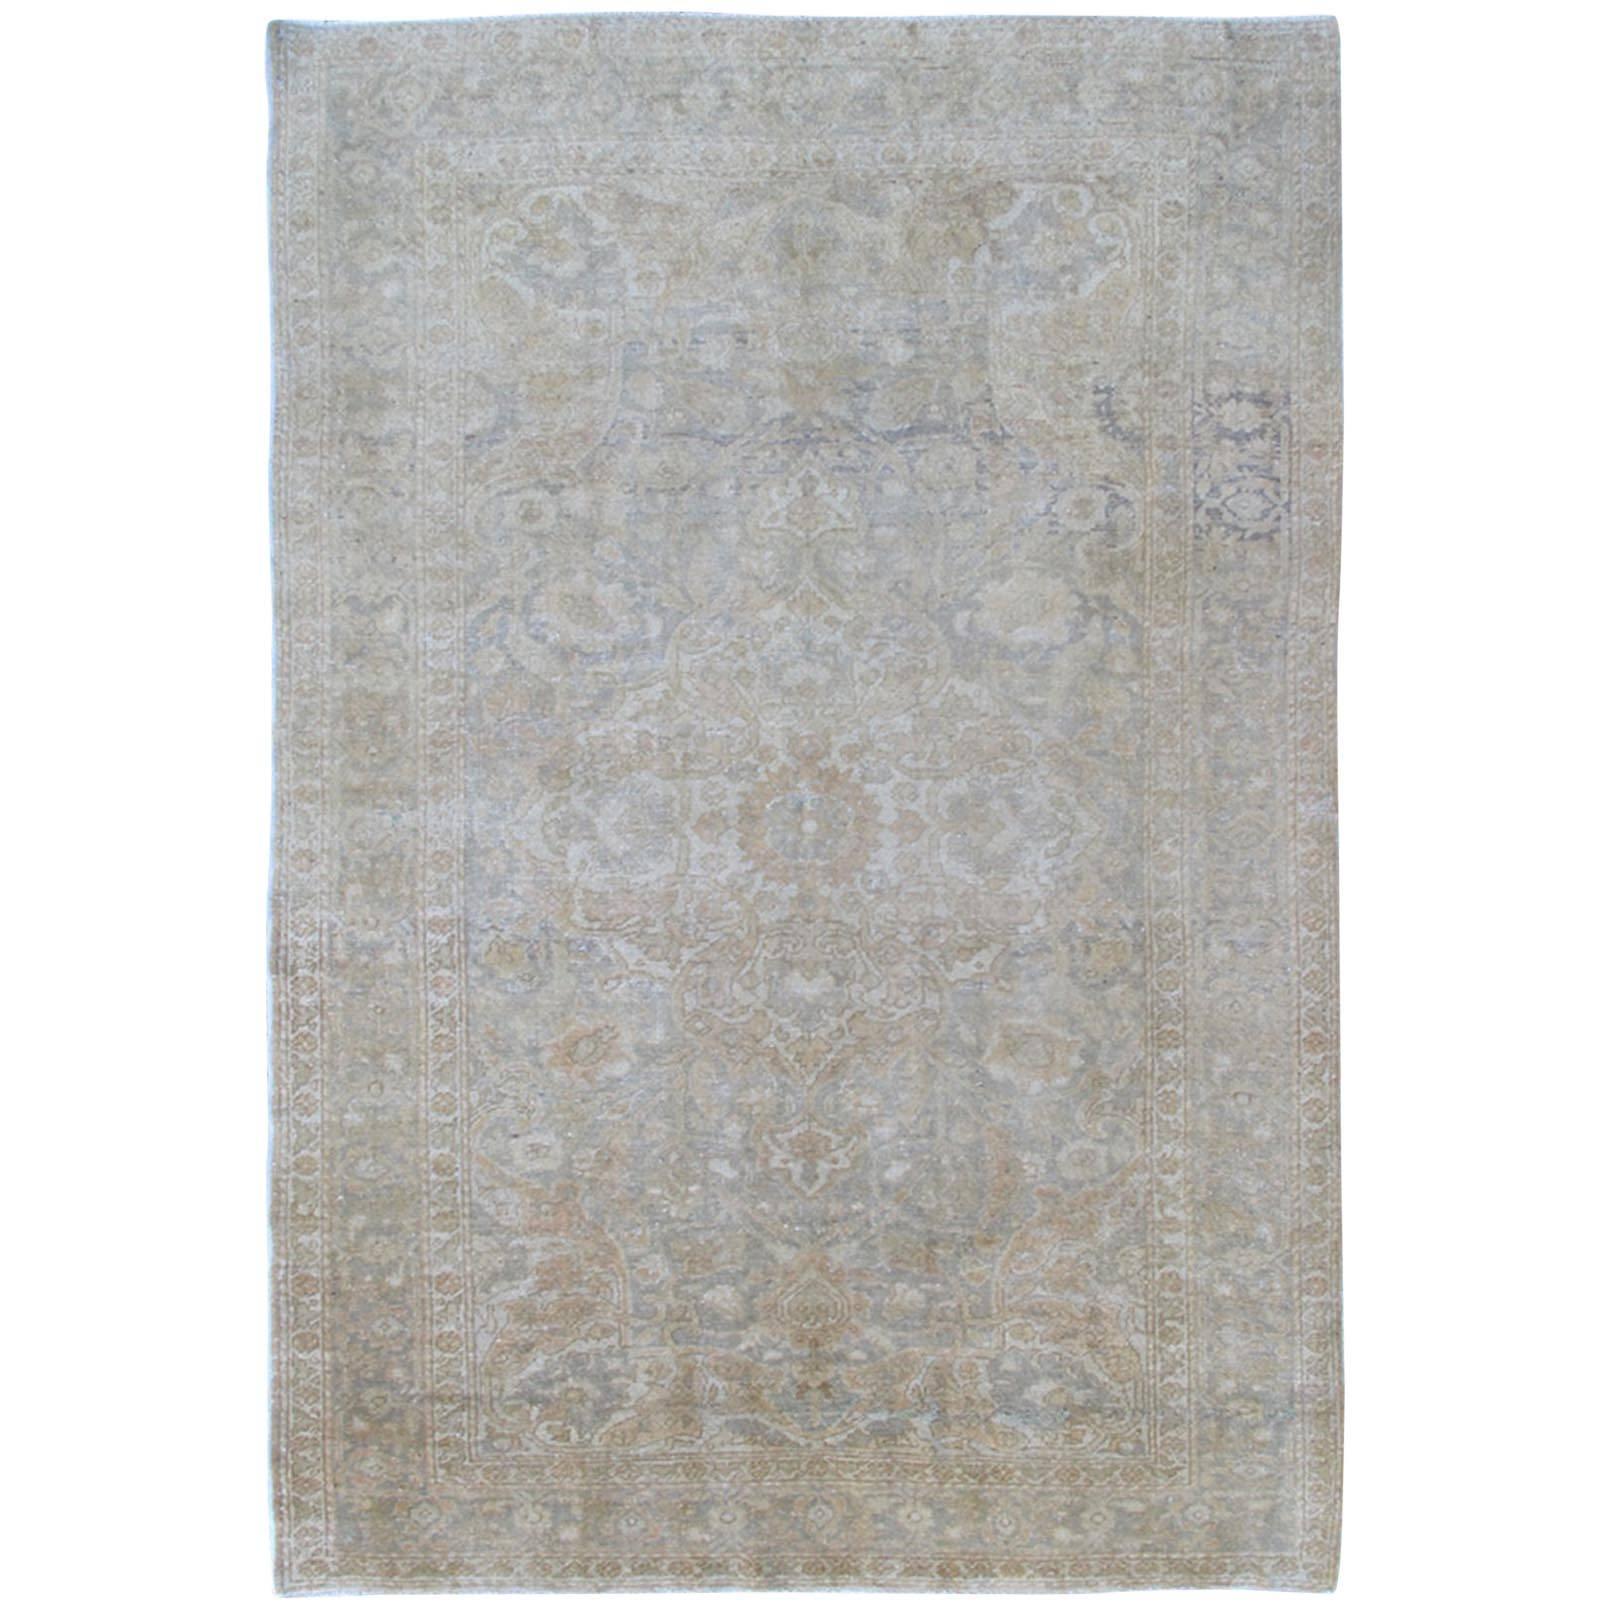 Gray Faded Vintage Turkish Sivas Rug with Floral Motifs and Medallion